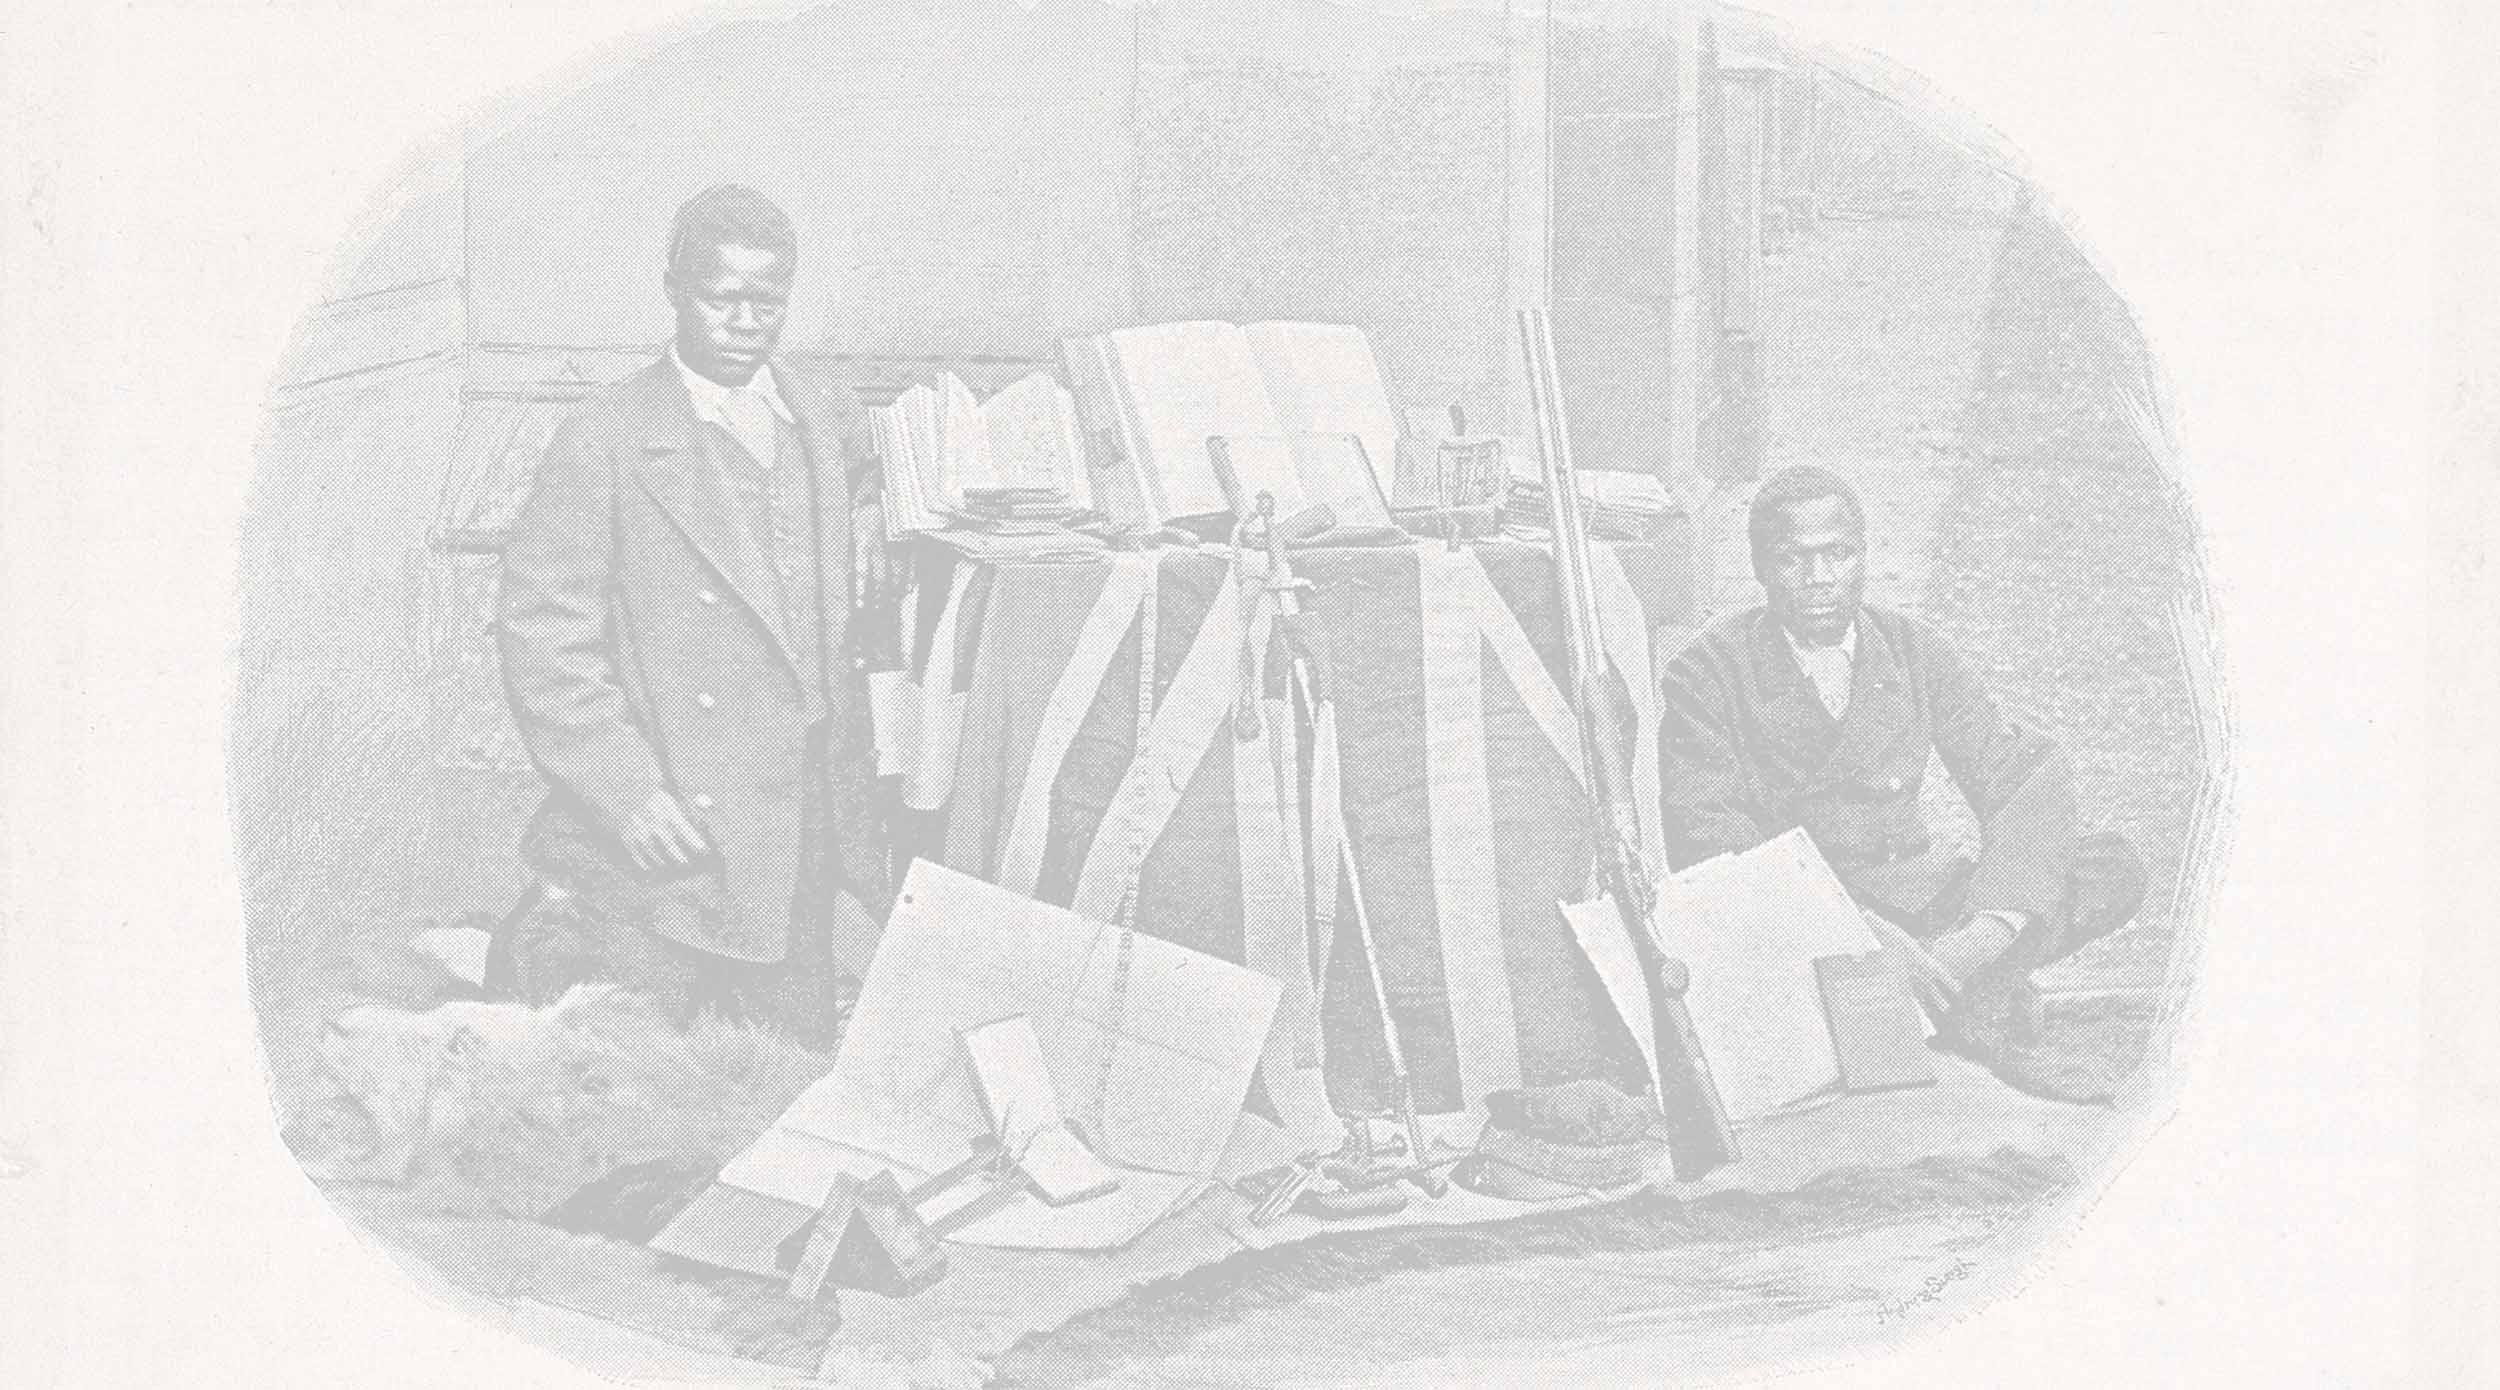 David Livingtone's followers, Susi and Chuma, pictured with his former possessions, 1873. Copyright Wellcome Library, London. Creative Commons Attribution 4.0 International (https://creativecommons.org/licenses/by/4.0/).